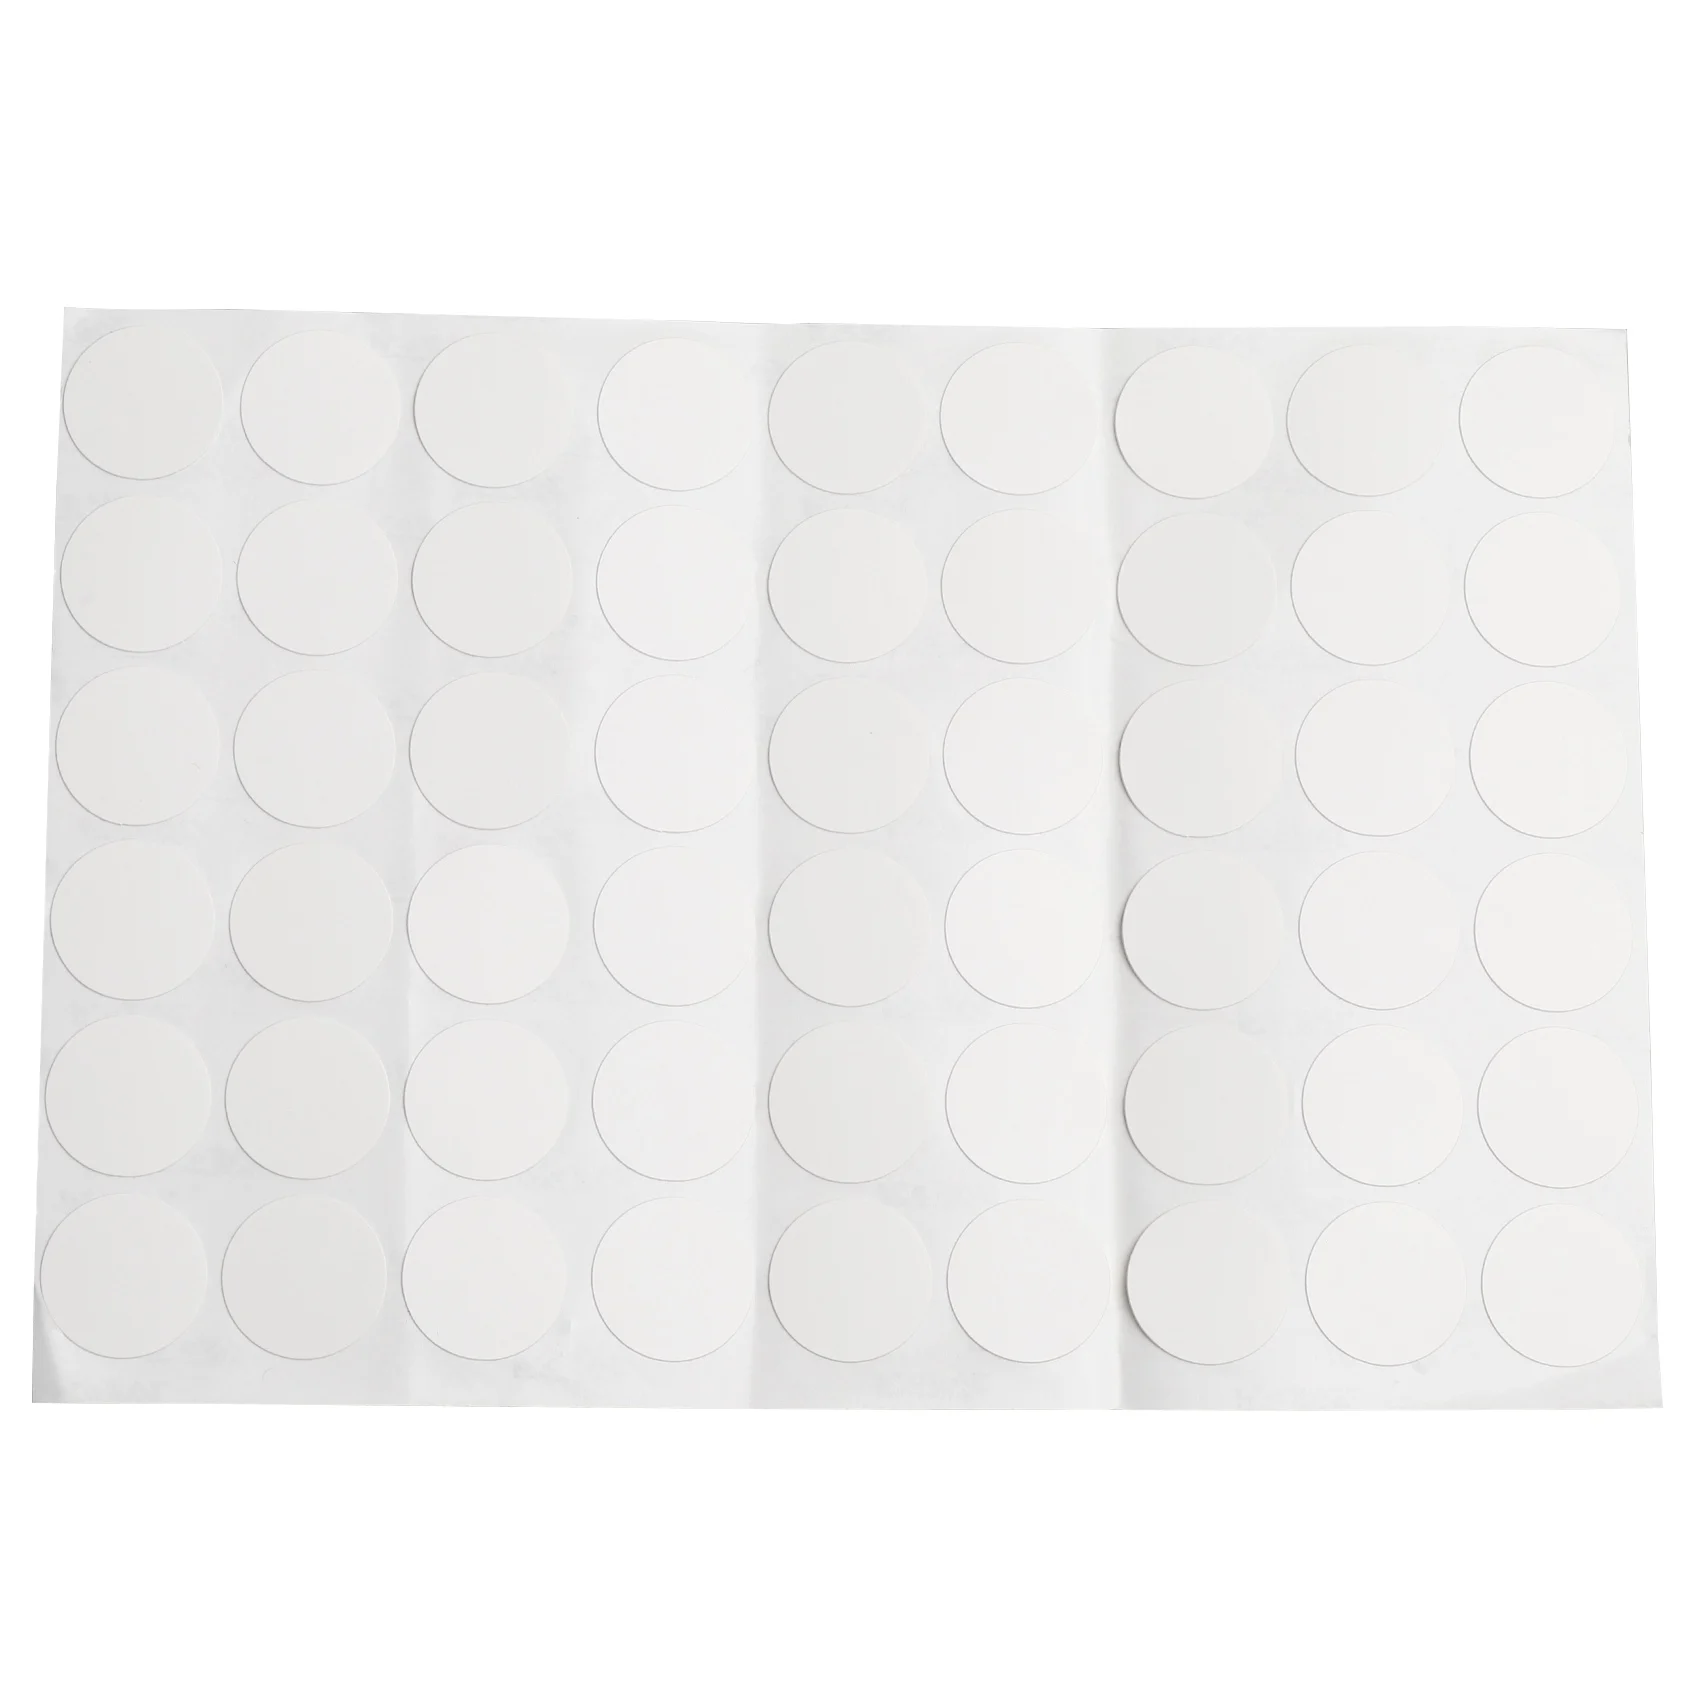 Wardrobe Cupboard Self-adhesive Screw Covers Caps Stickers 54 in 1 White